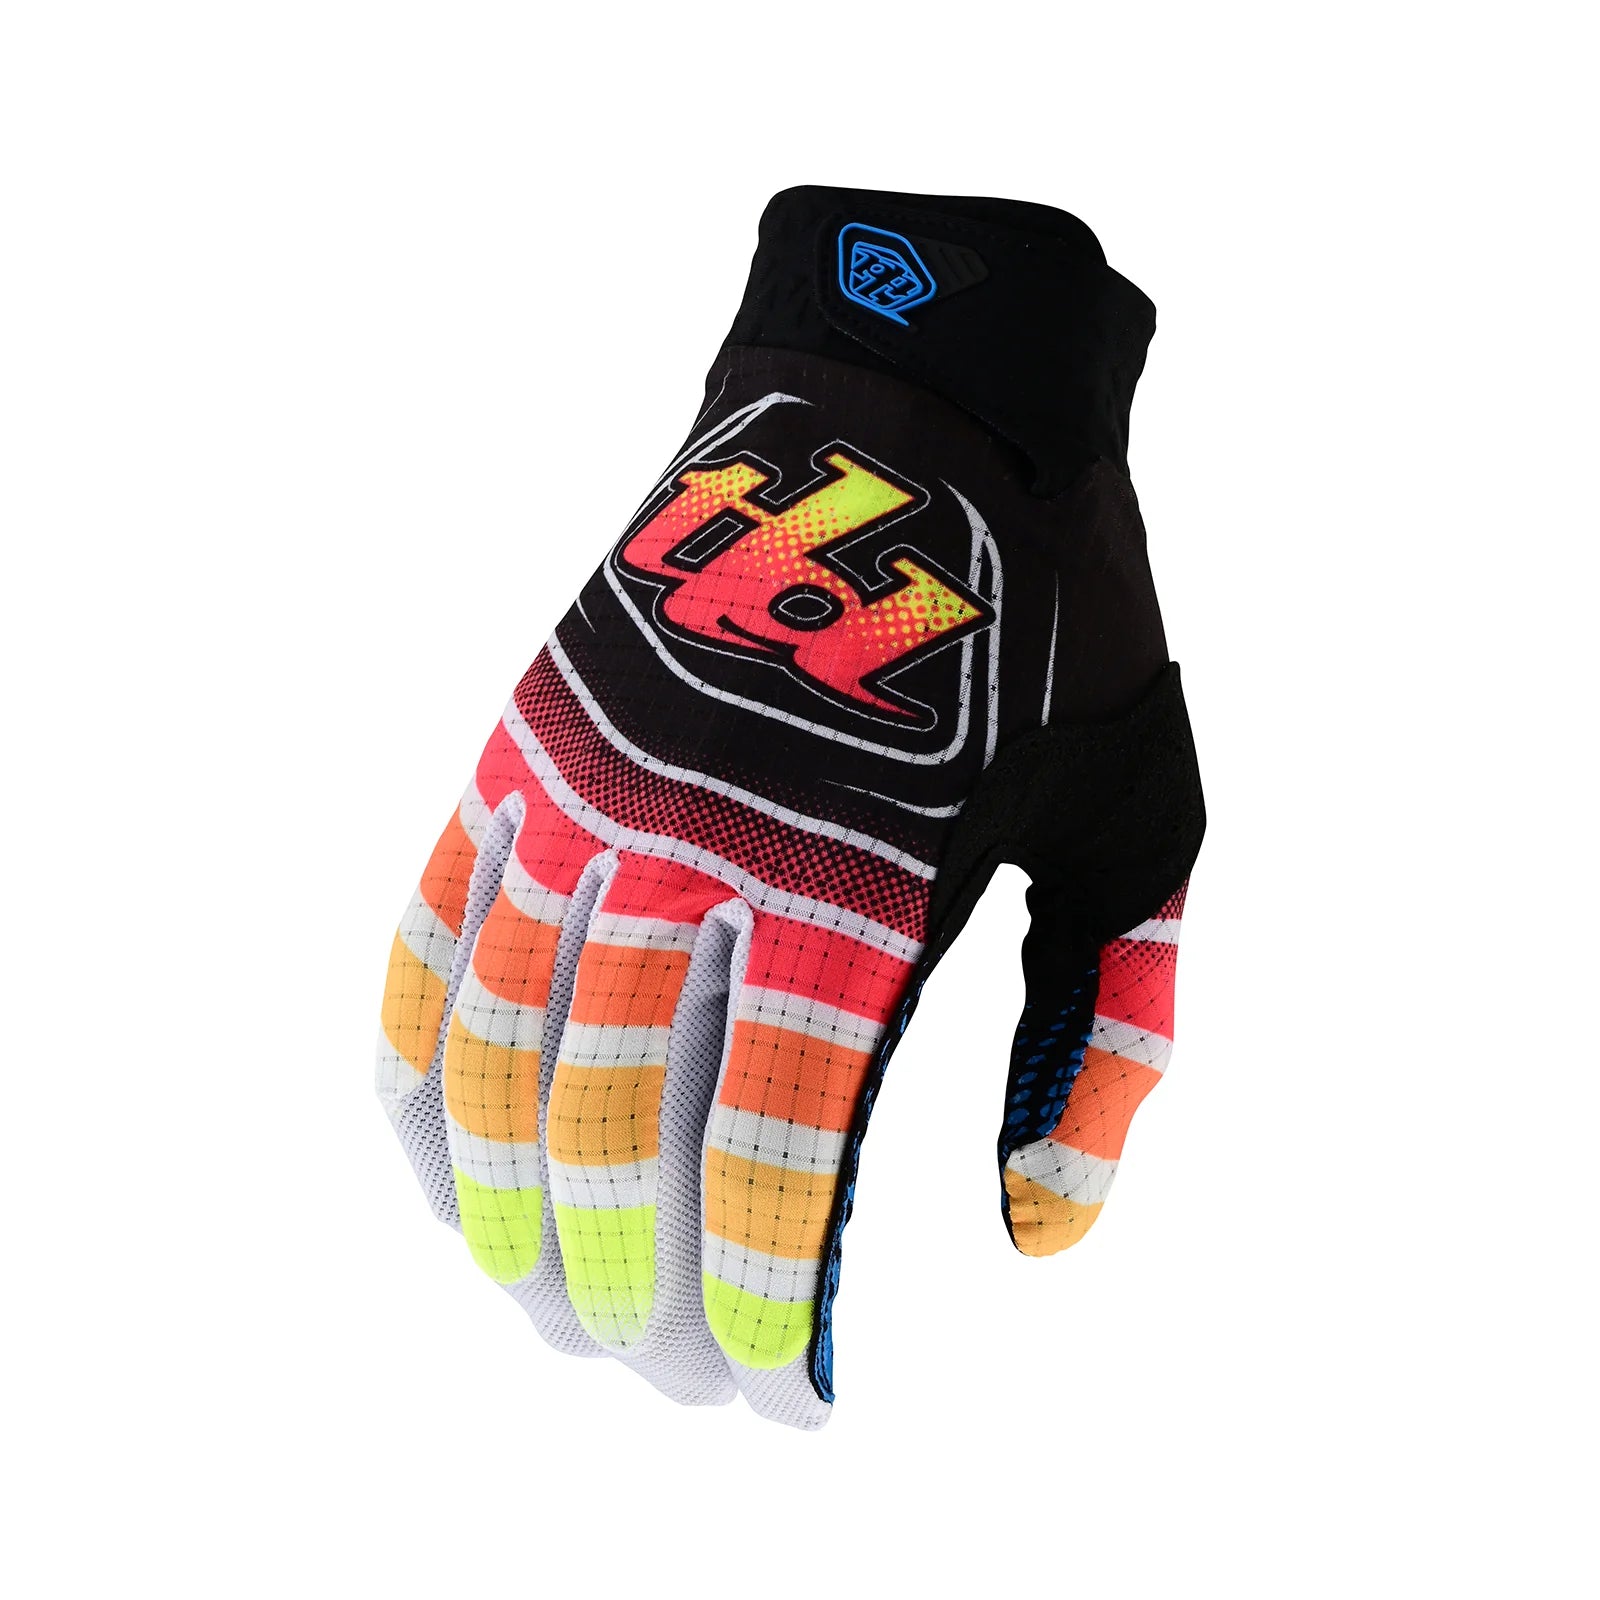 Colorful breathable TLD Air Glove Wavez Black/Multi isolated on a white background.